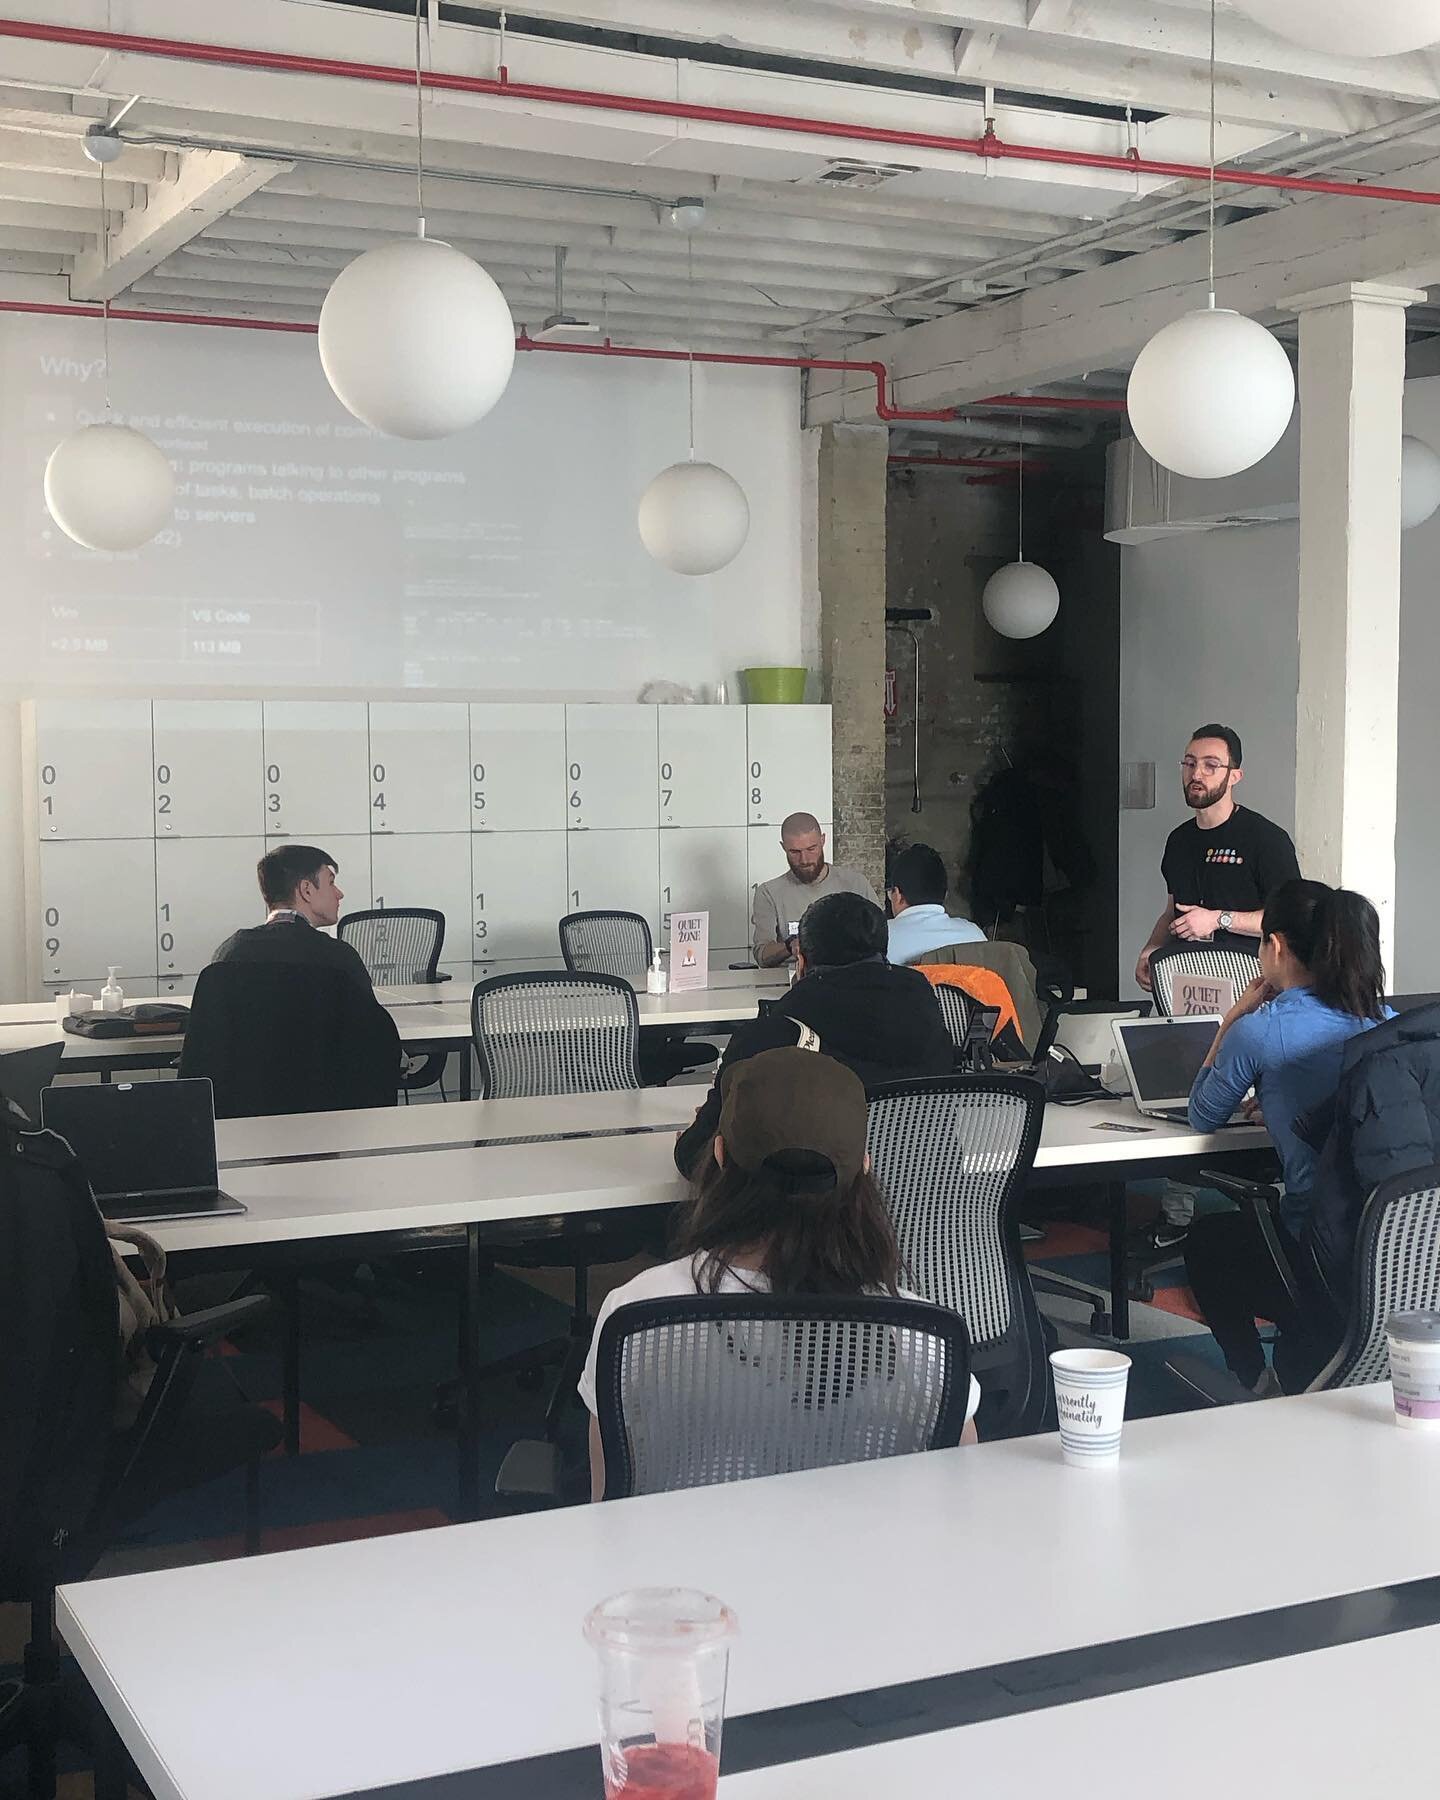 We had a good time this Sunday at Code and Coffee! Big thanks to all of you for coming out to join us on a beautiful day. 
Special thanks to @charlesinwald for leading a workshop on Command Line Essentials. If you want access to the slides and the ac